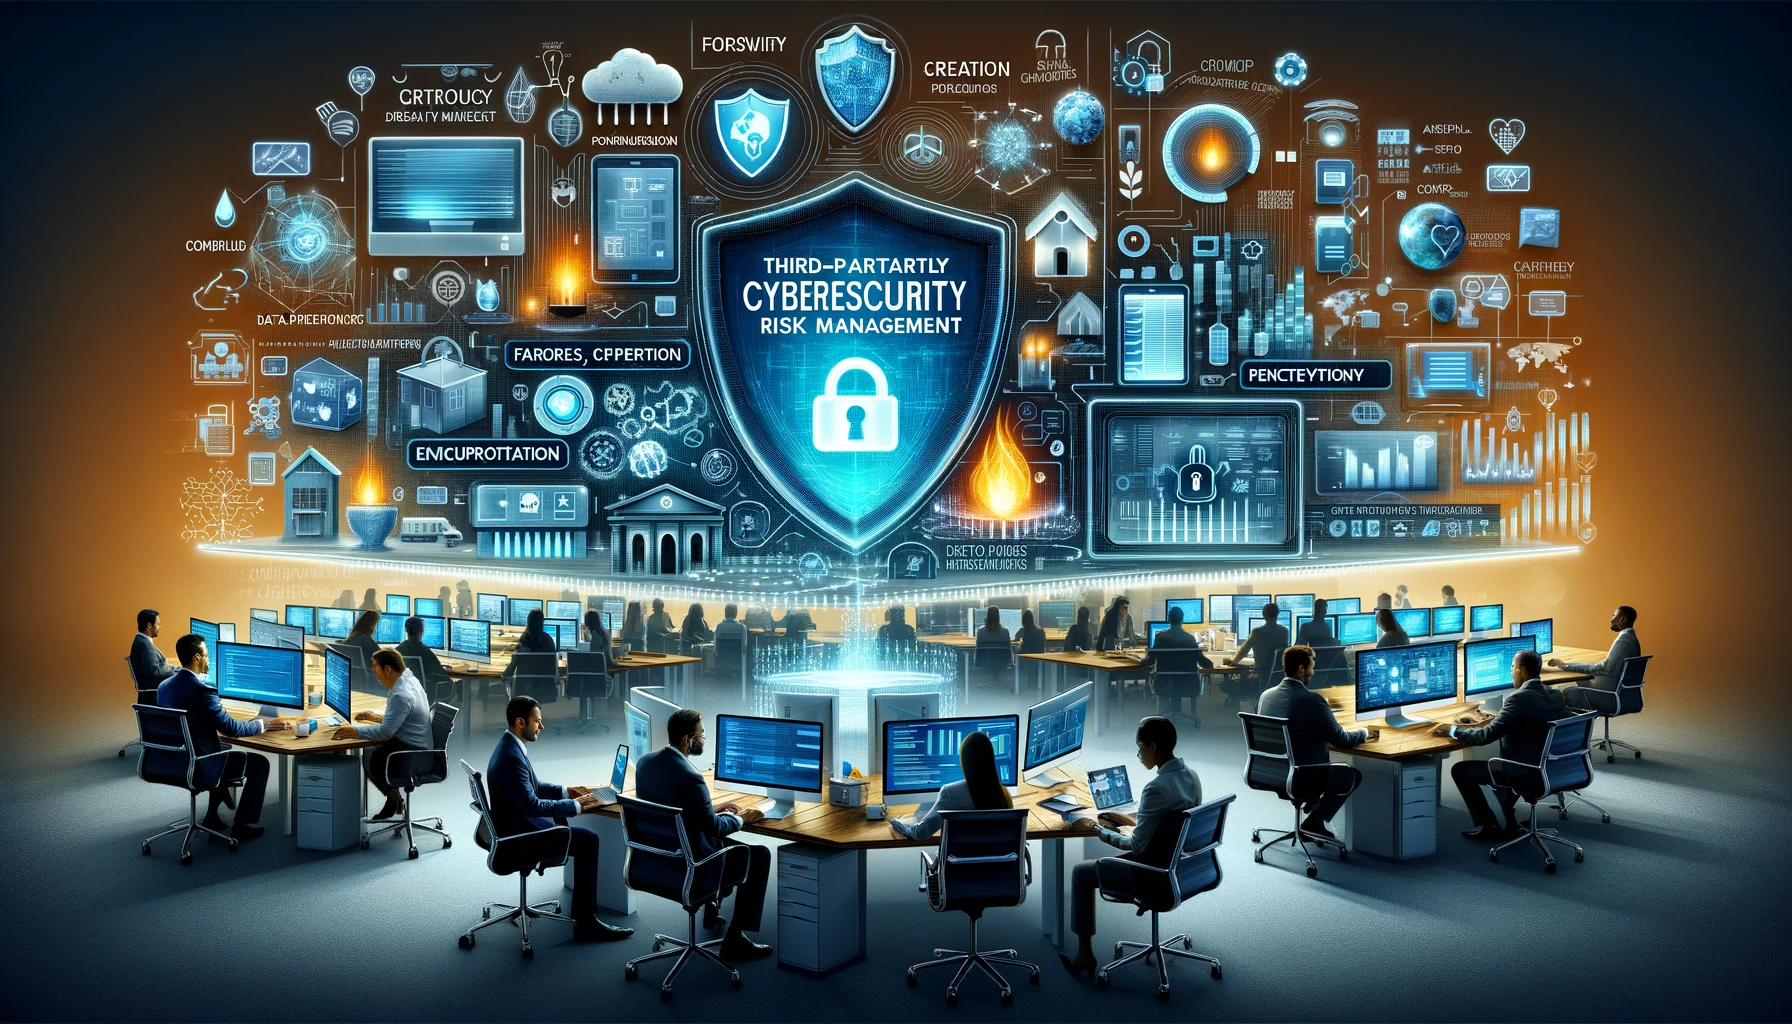 An image showing the Foundations of Third-Party Cybersecurity Risk Management